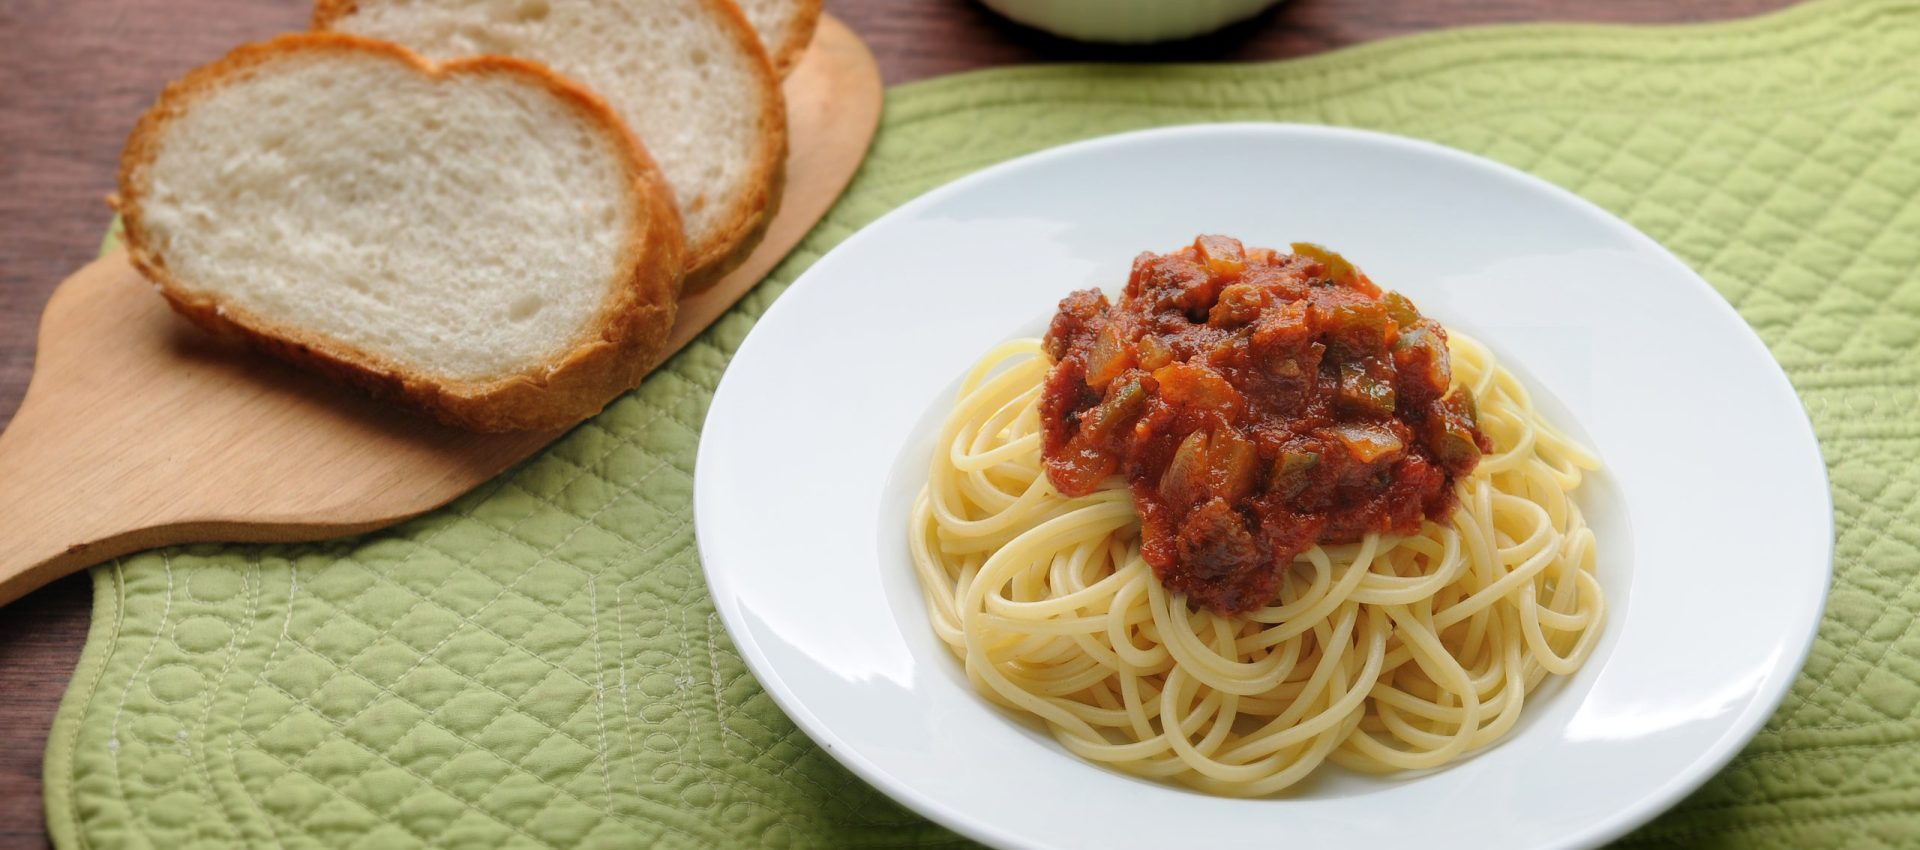 Spaghetti with Italian red sauce with onions and bell peppers and a side of bread